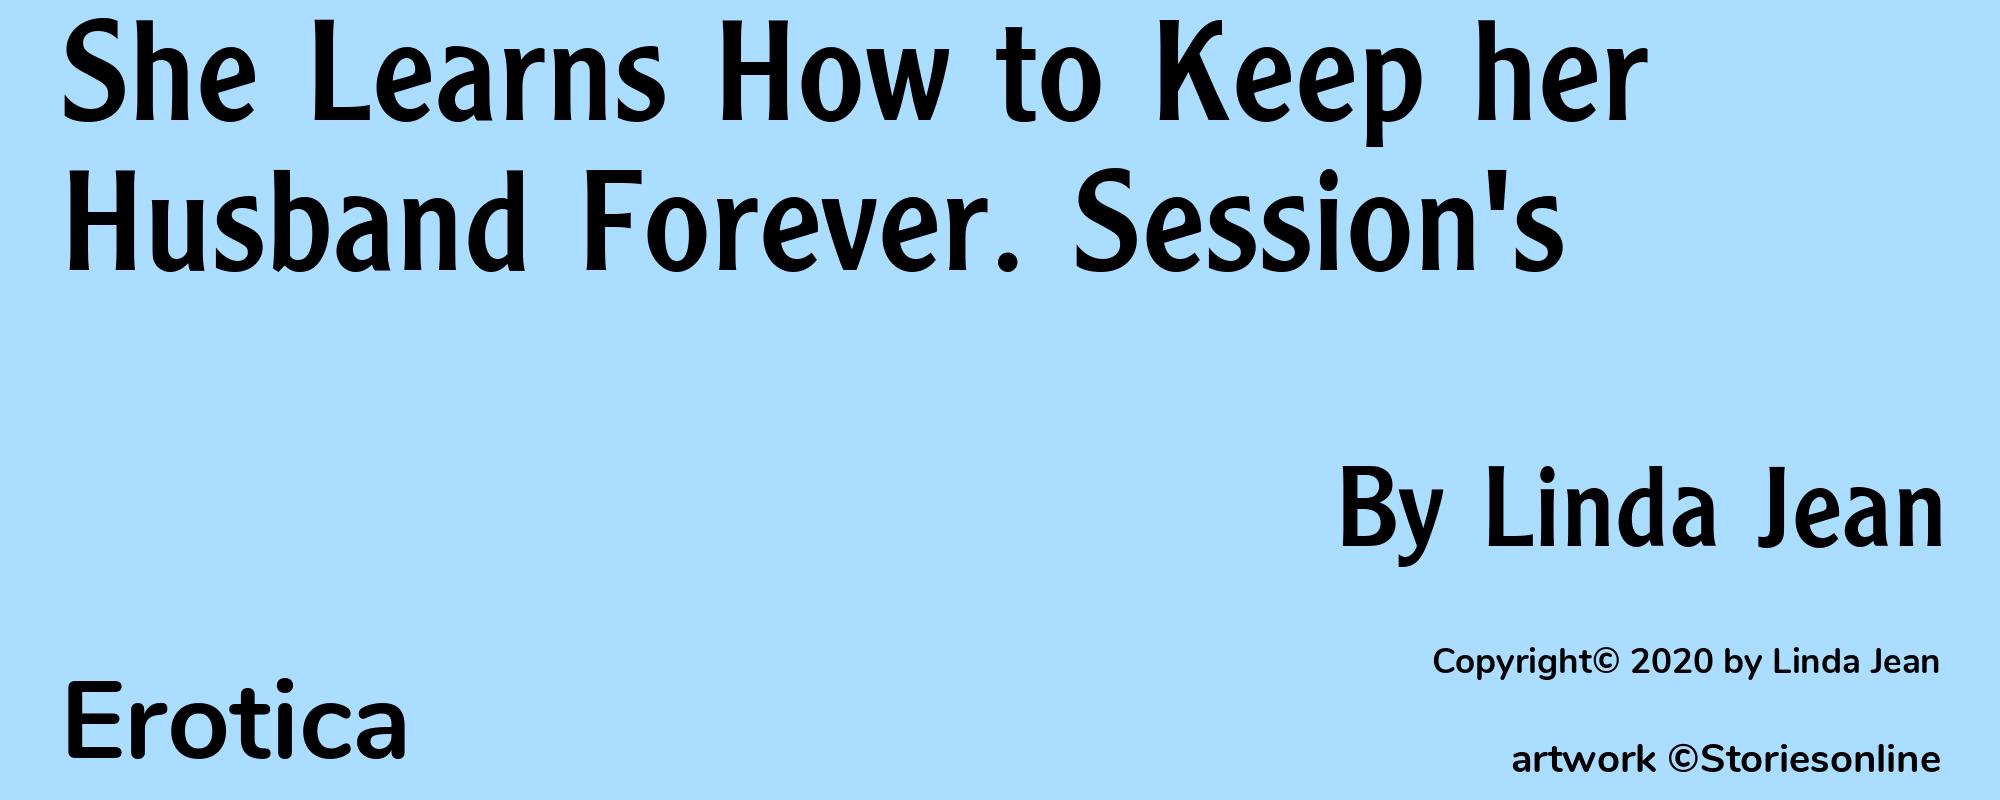 She Learns How to Keep her Husband Forever. Session's - Cover